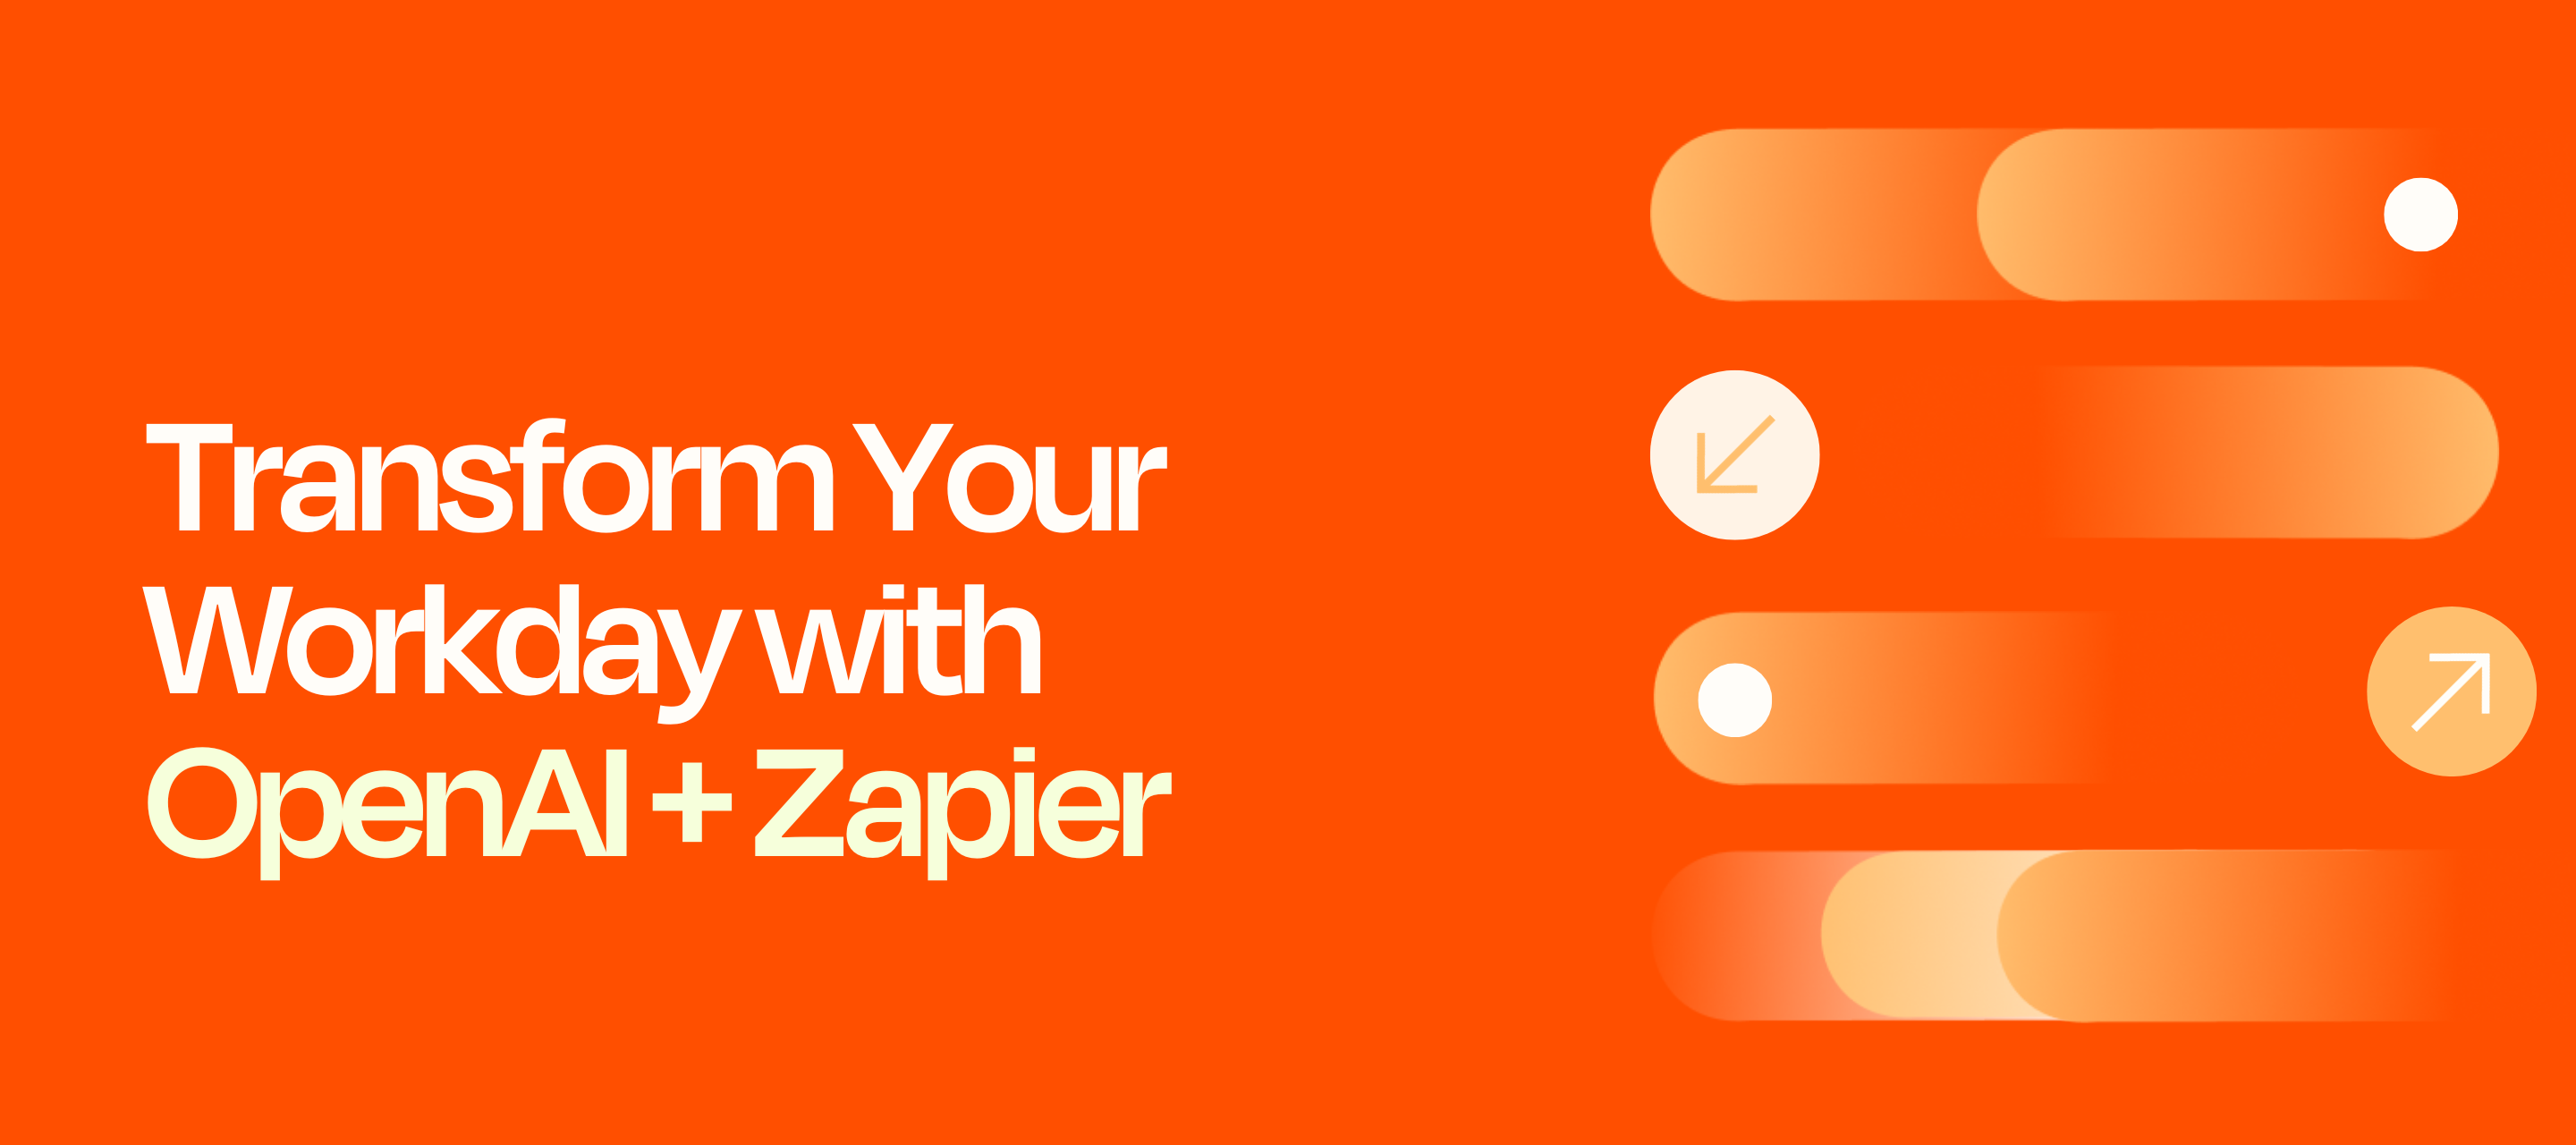 Transform Your Workday with OpenAI + Zapier